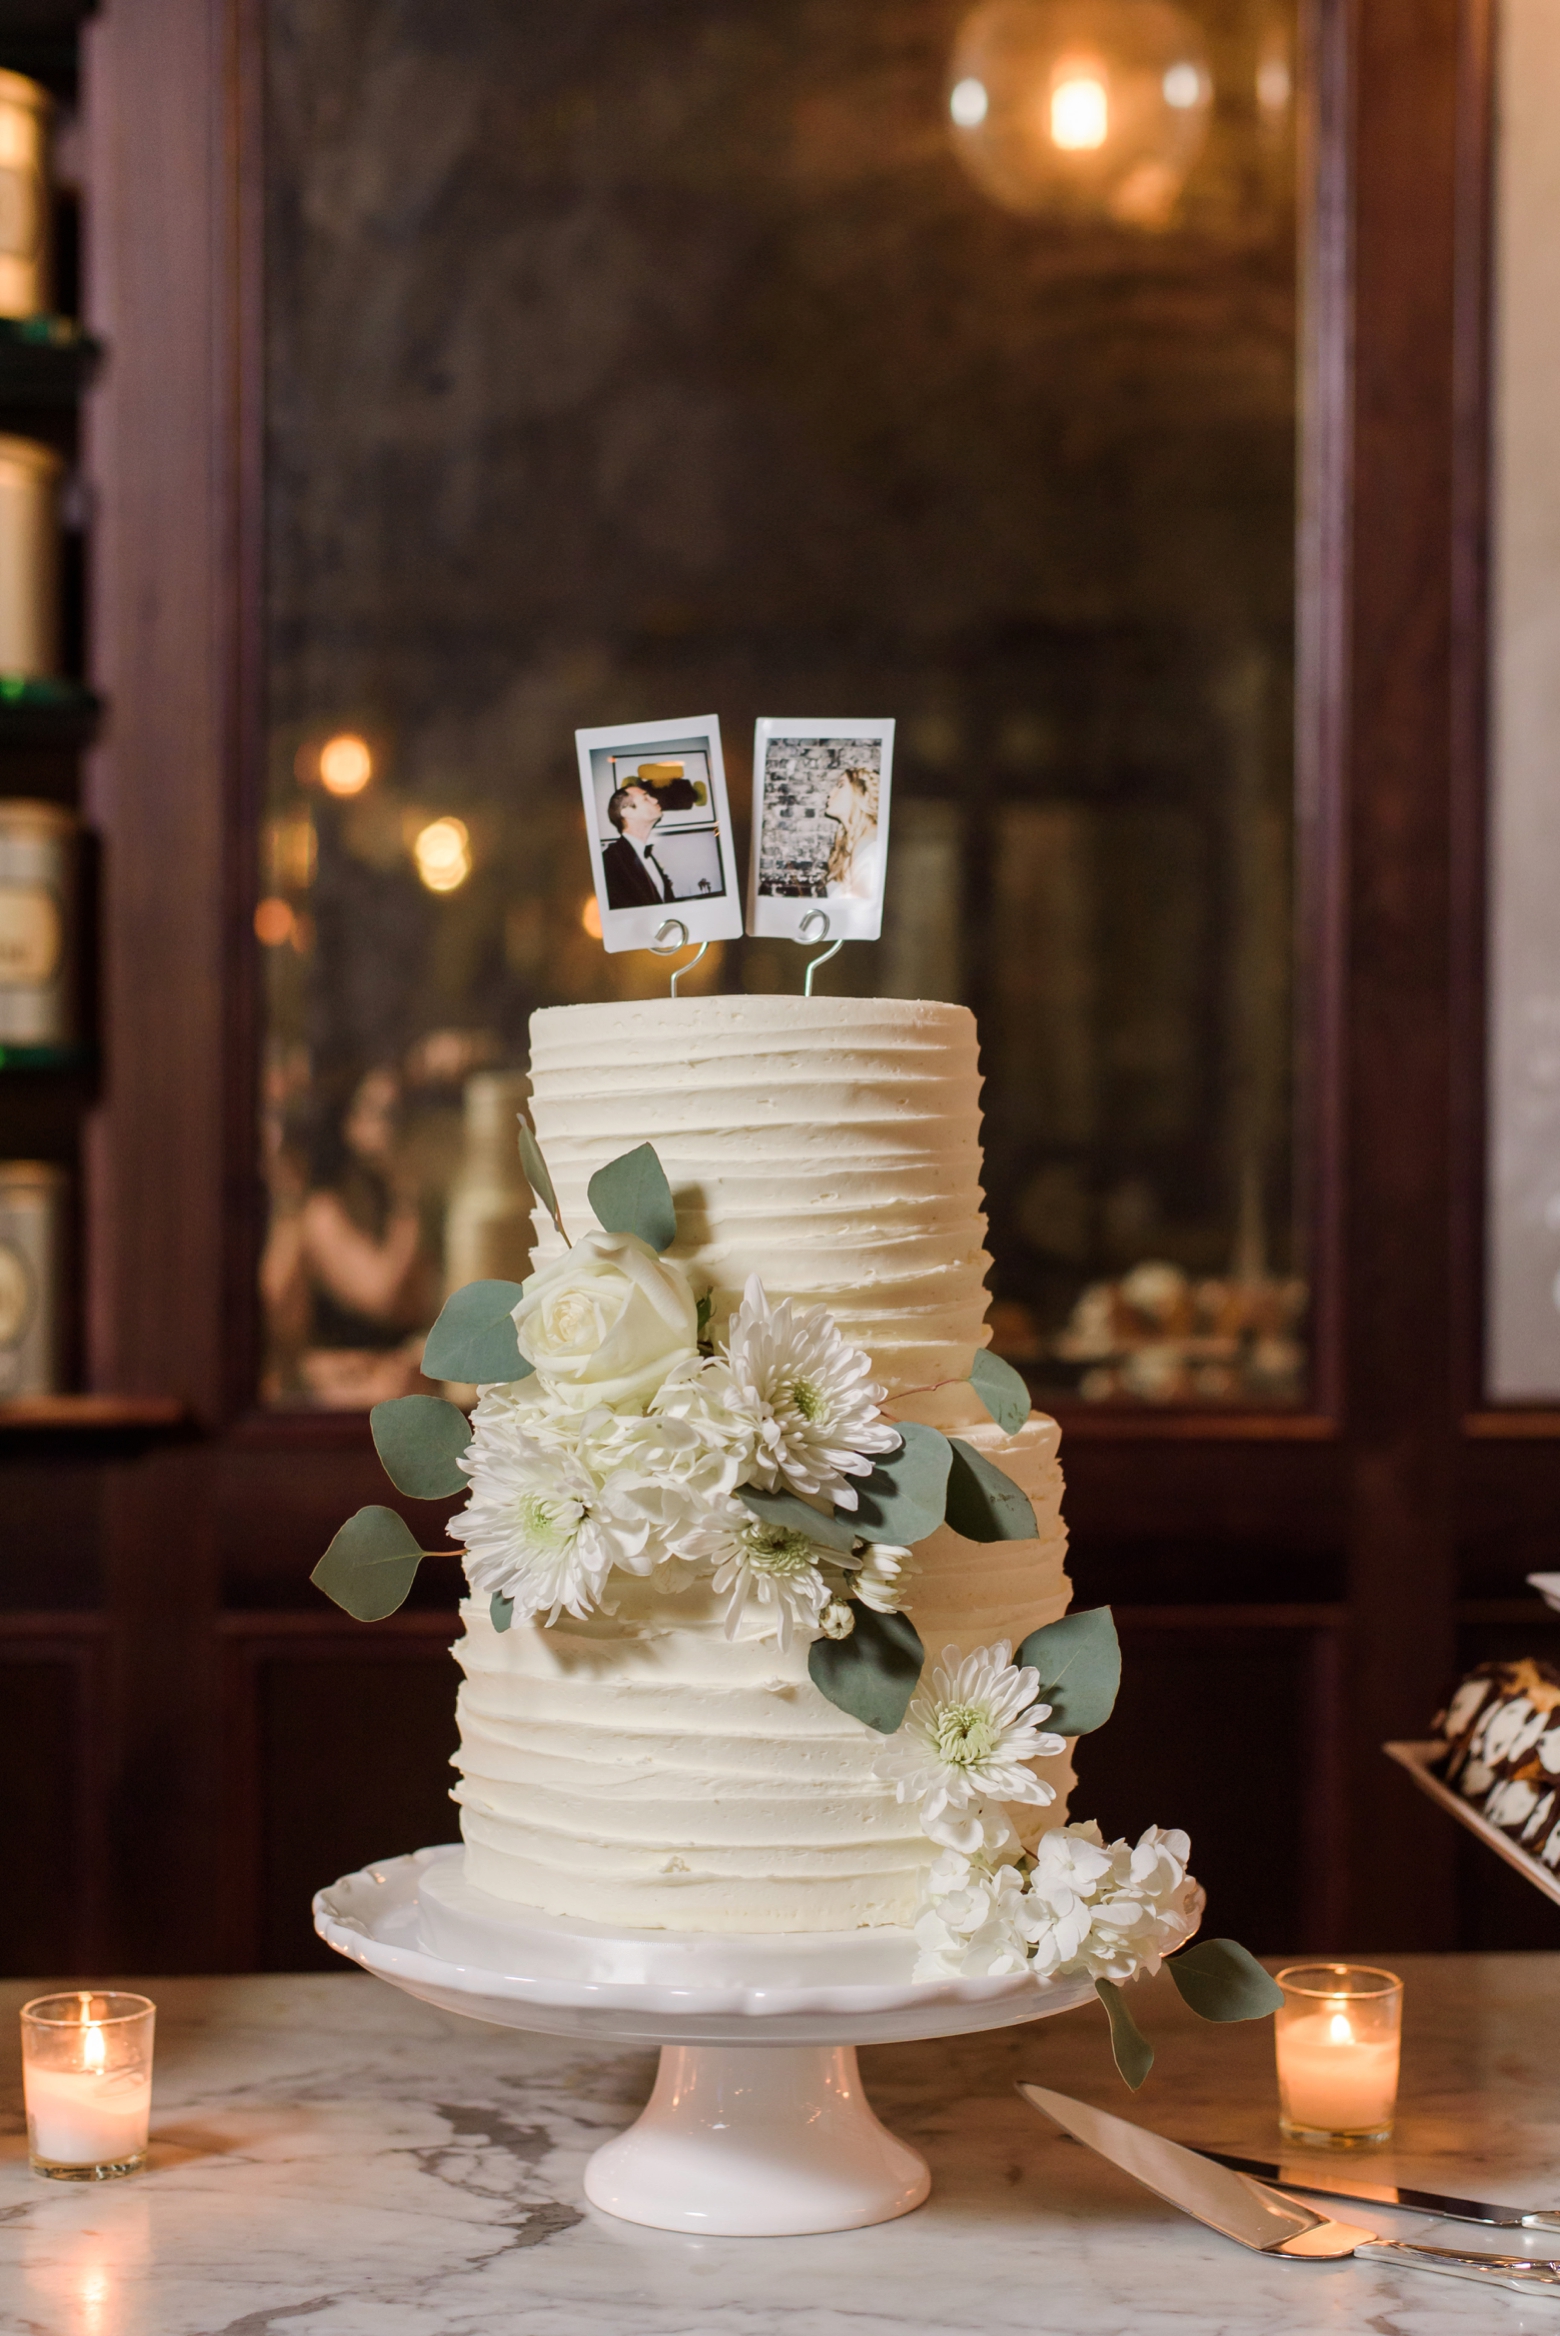 The wedding cake with insta film selfies of the Bride and Groom as cake toppers